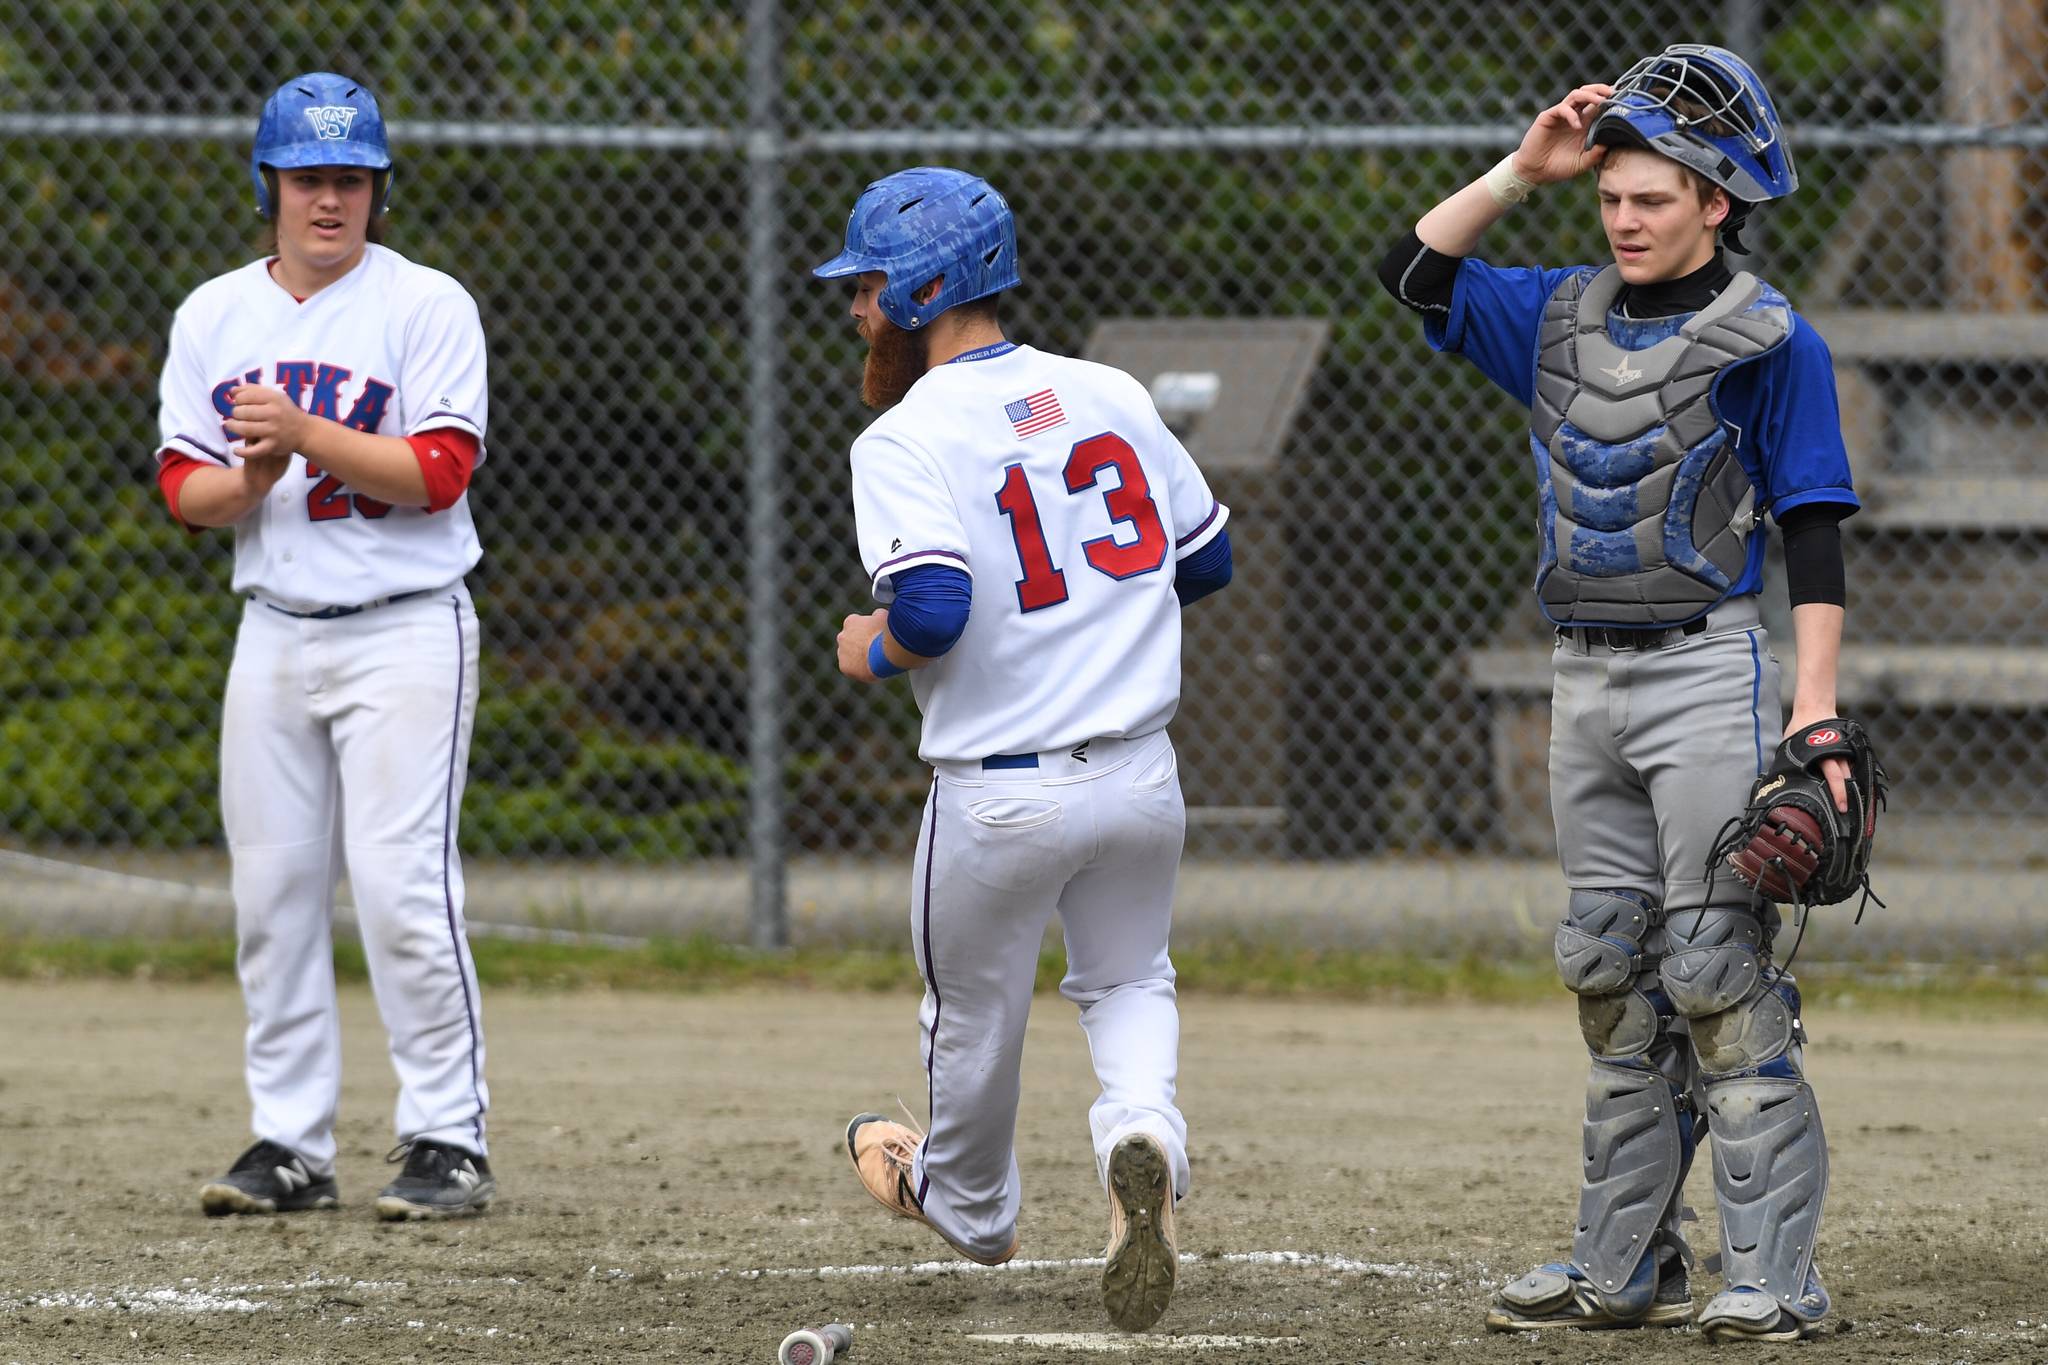 Sitka’s Isaac Roth, left, and Morgan Simic score on a dropped infield pop-up by Thunder Mountain during the Region V Baseball Championship at Adair-Kennedy Memorial Park on Friday, May 24, 2019. (Michael Penn | Juneau Empire)